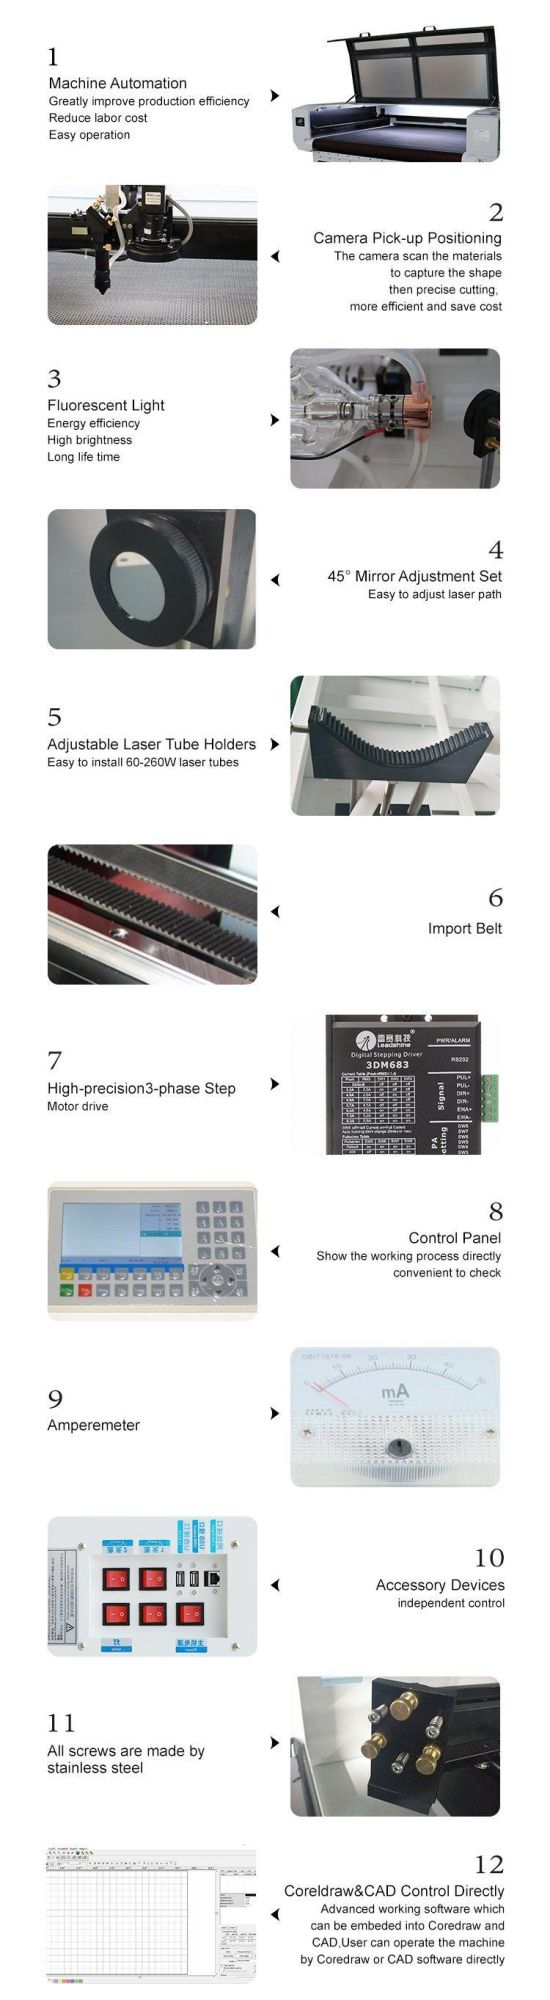 Industrial Machinery Lihua Ccd Label Die Fabric Textile Laser Engraving And Cutting Machine